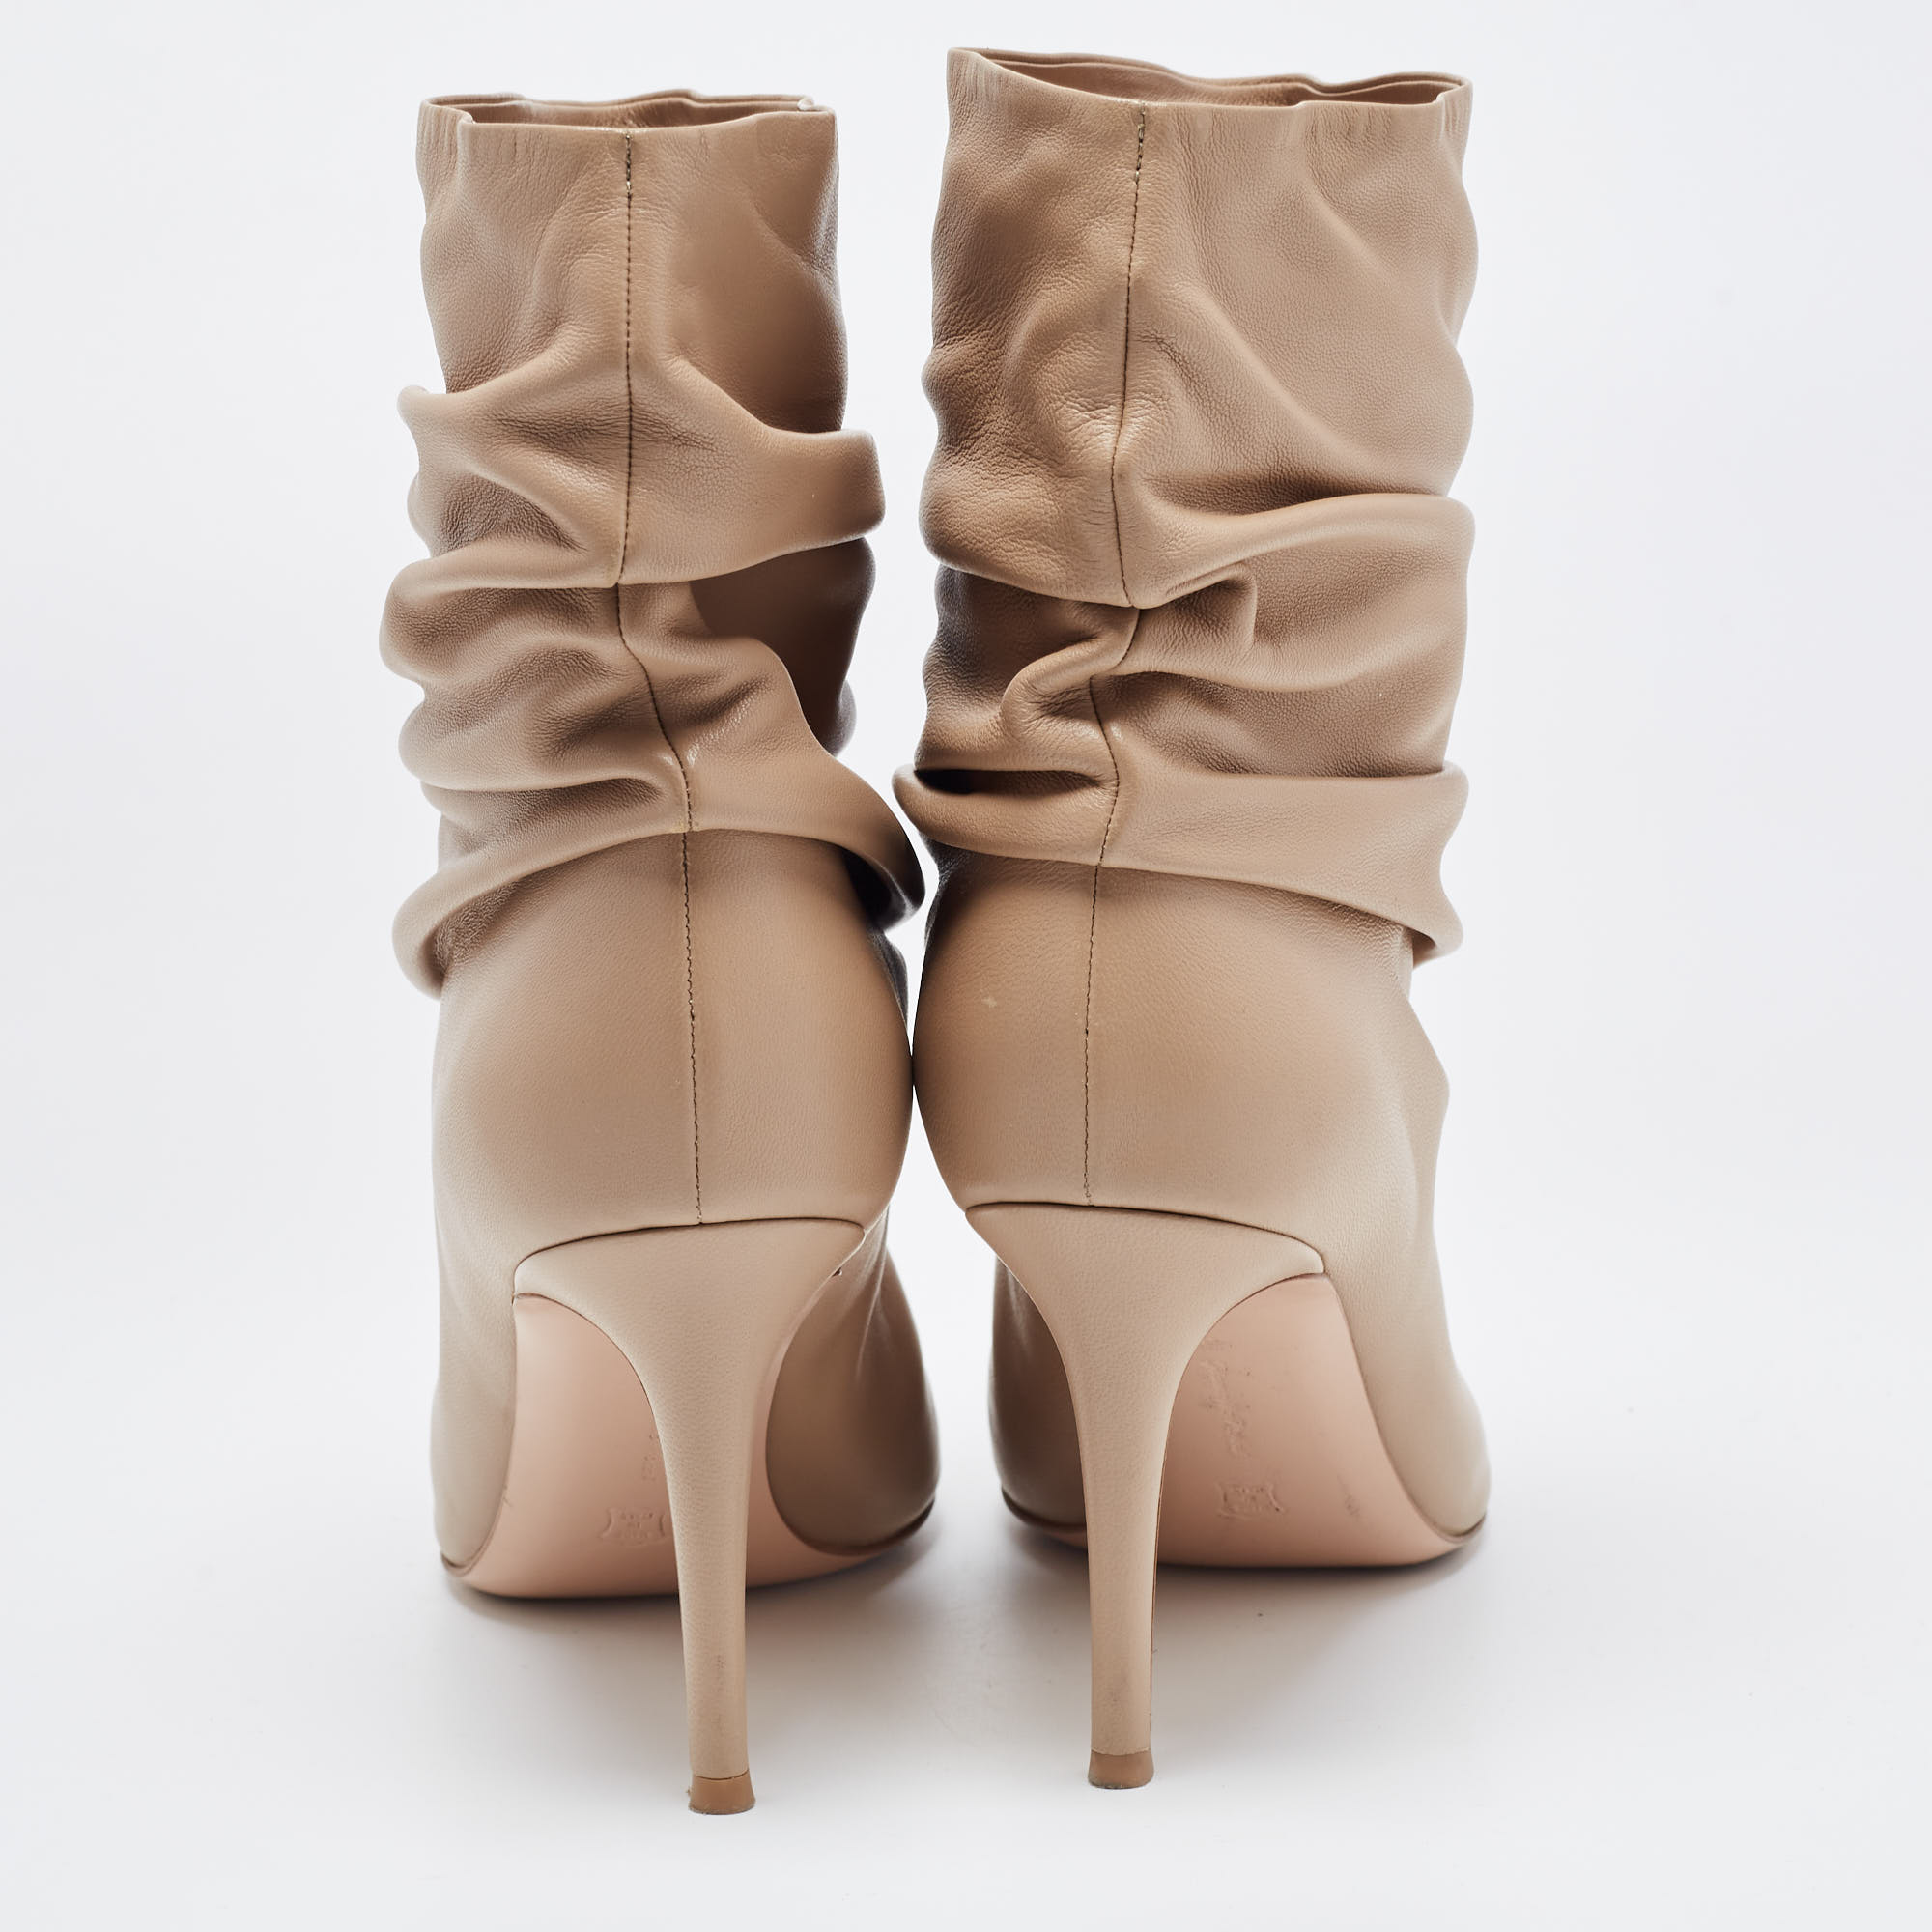 Gianvito Rossi Beige Leather Ruched Ankle Boots Size 39